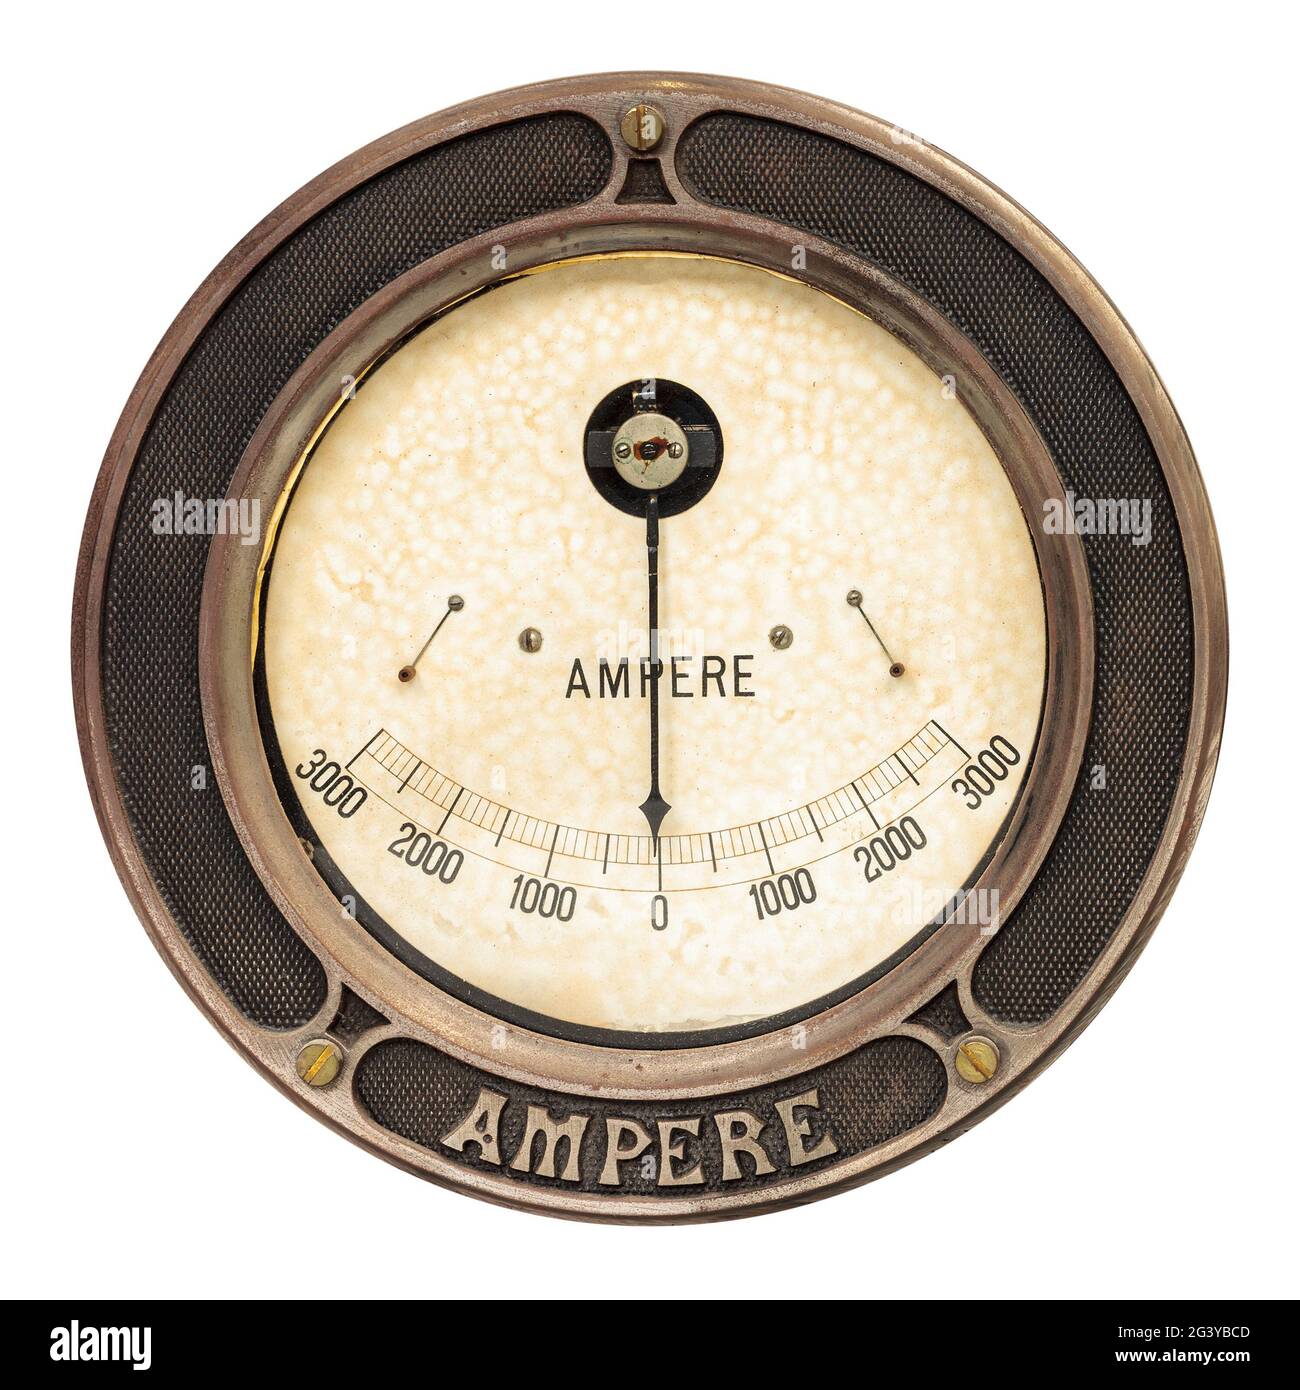 Vintage round analog ampere meter isolated on a white background Stock Photo